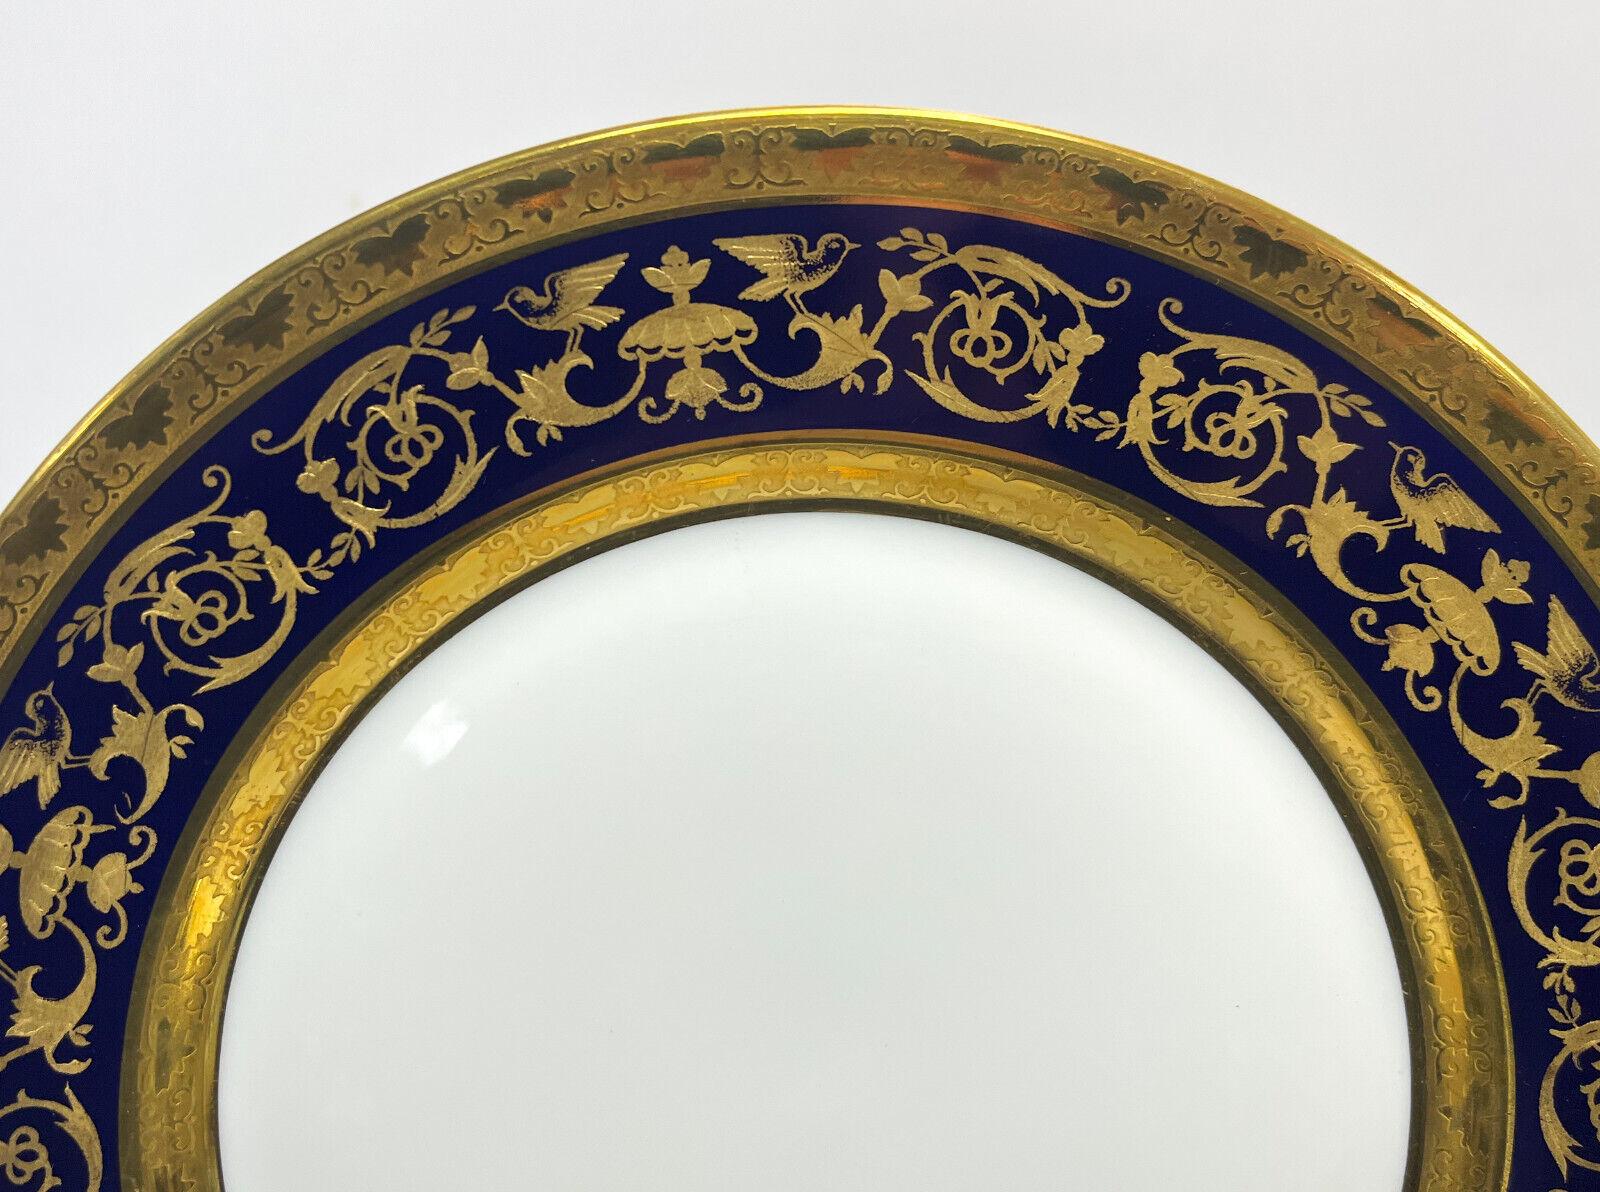 12 Limoges Raynaud porcelain dessert or salad plates in Pompei. A cobalt blue ground with rich gilt birds and foliate scrolls.The “bleu de four” motifs taken from a sumptuous antique vase are hand-enhanced with fine gold.  Limoges Raynaud mark to